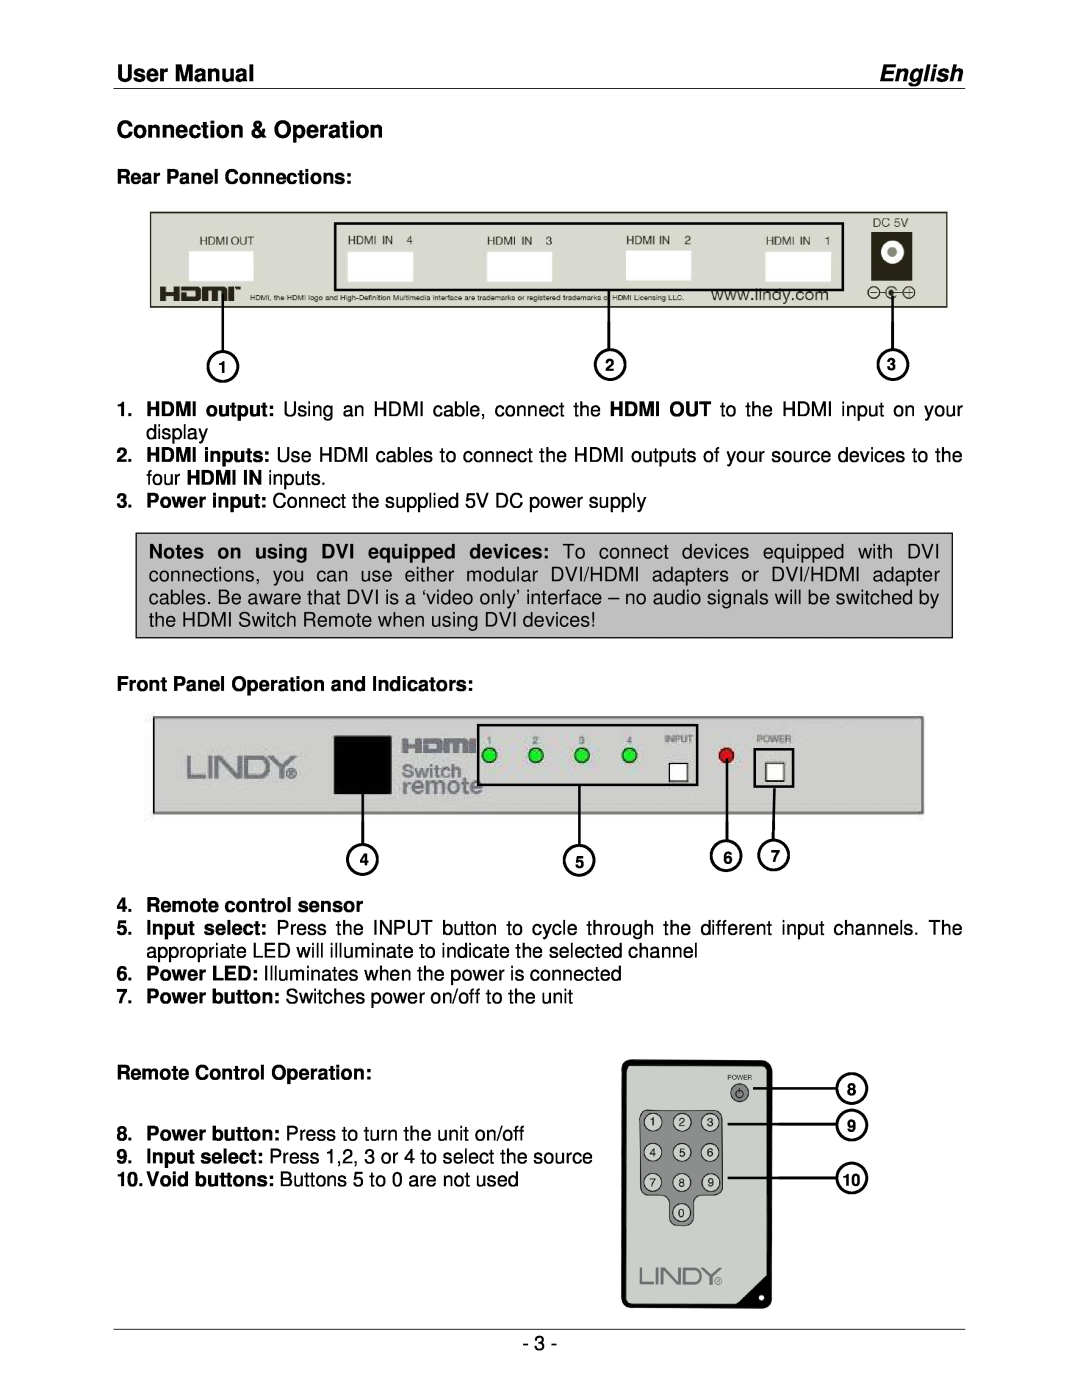 Lindy lindy no. 32594 user manual Connection & Operation, User Manual, English, Rear Panel Connections 